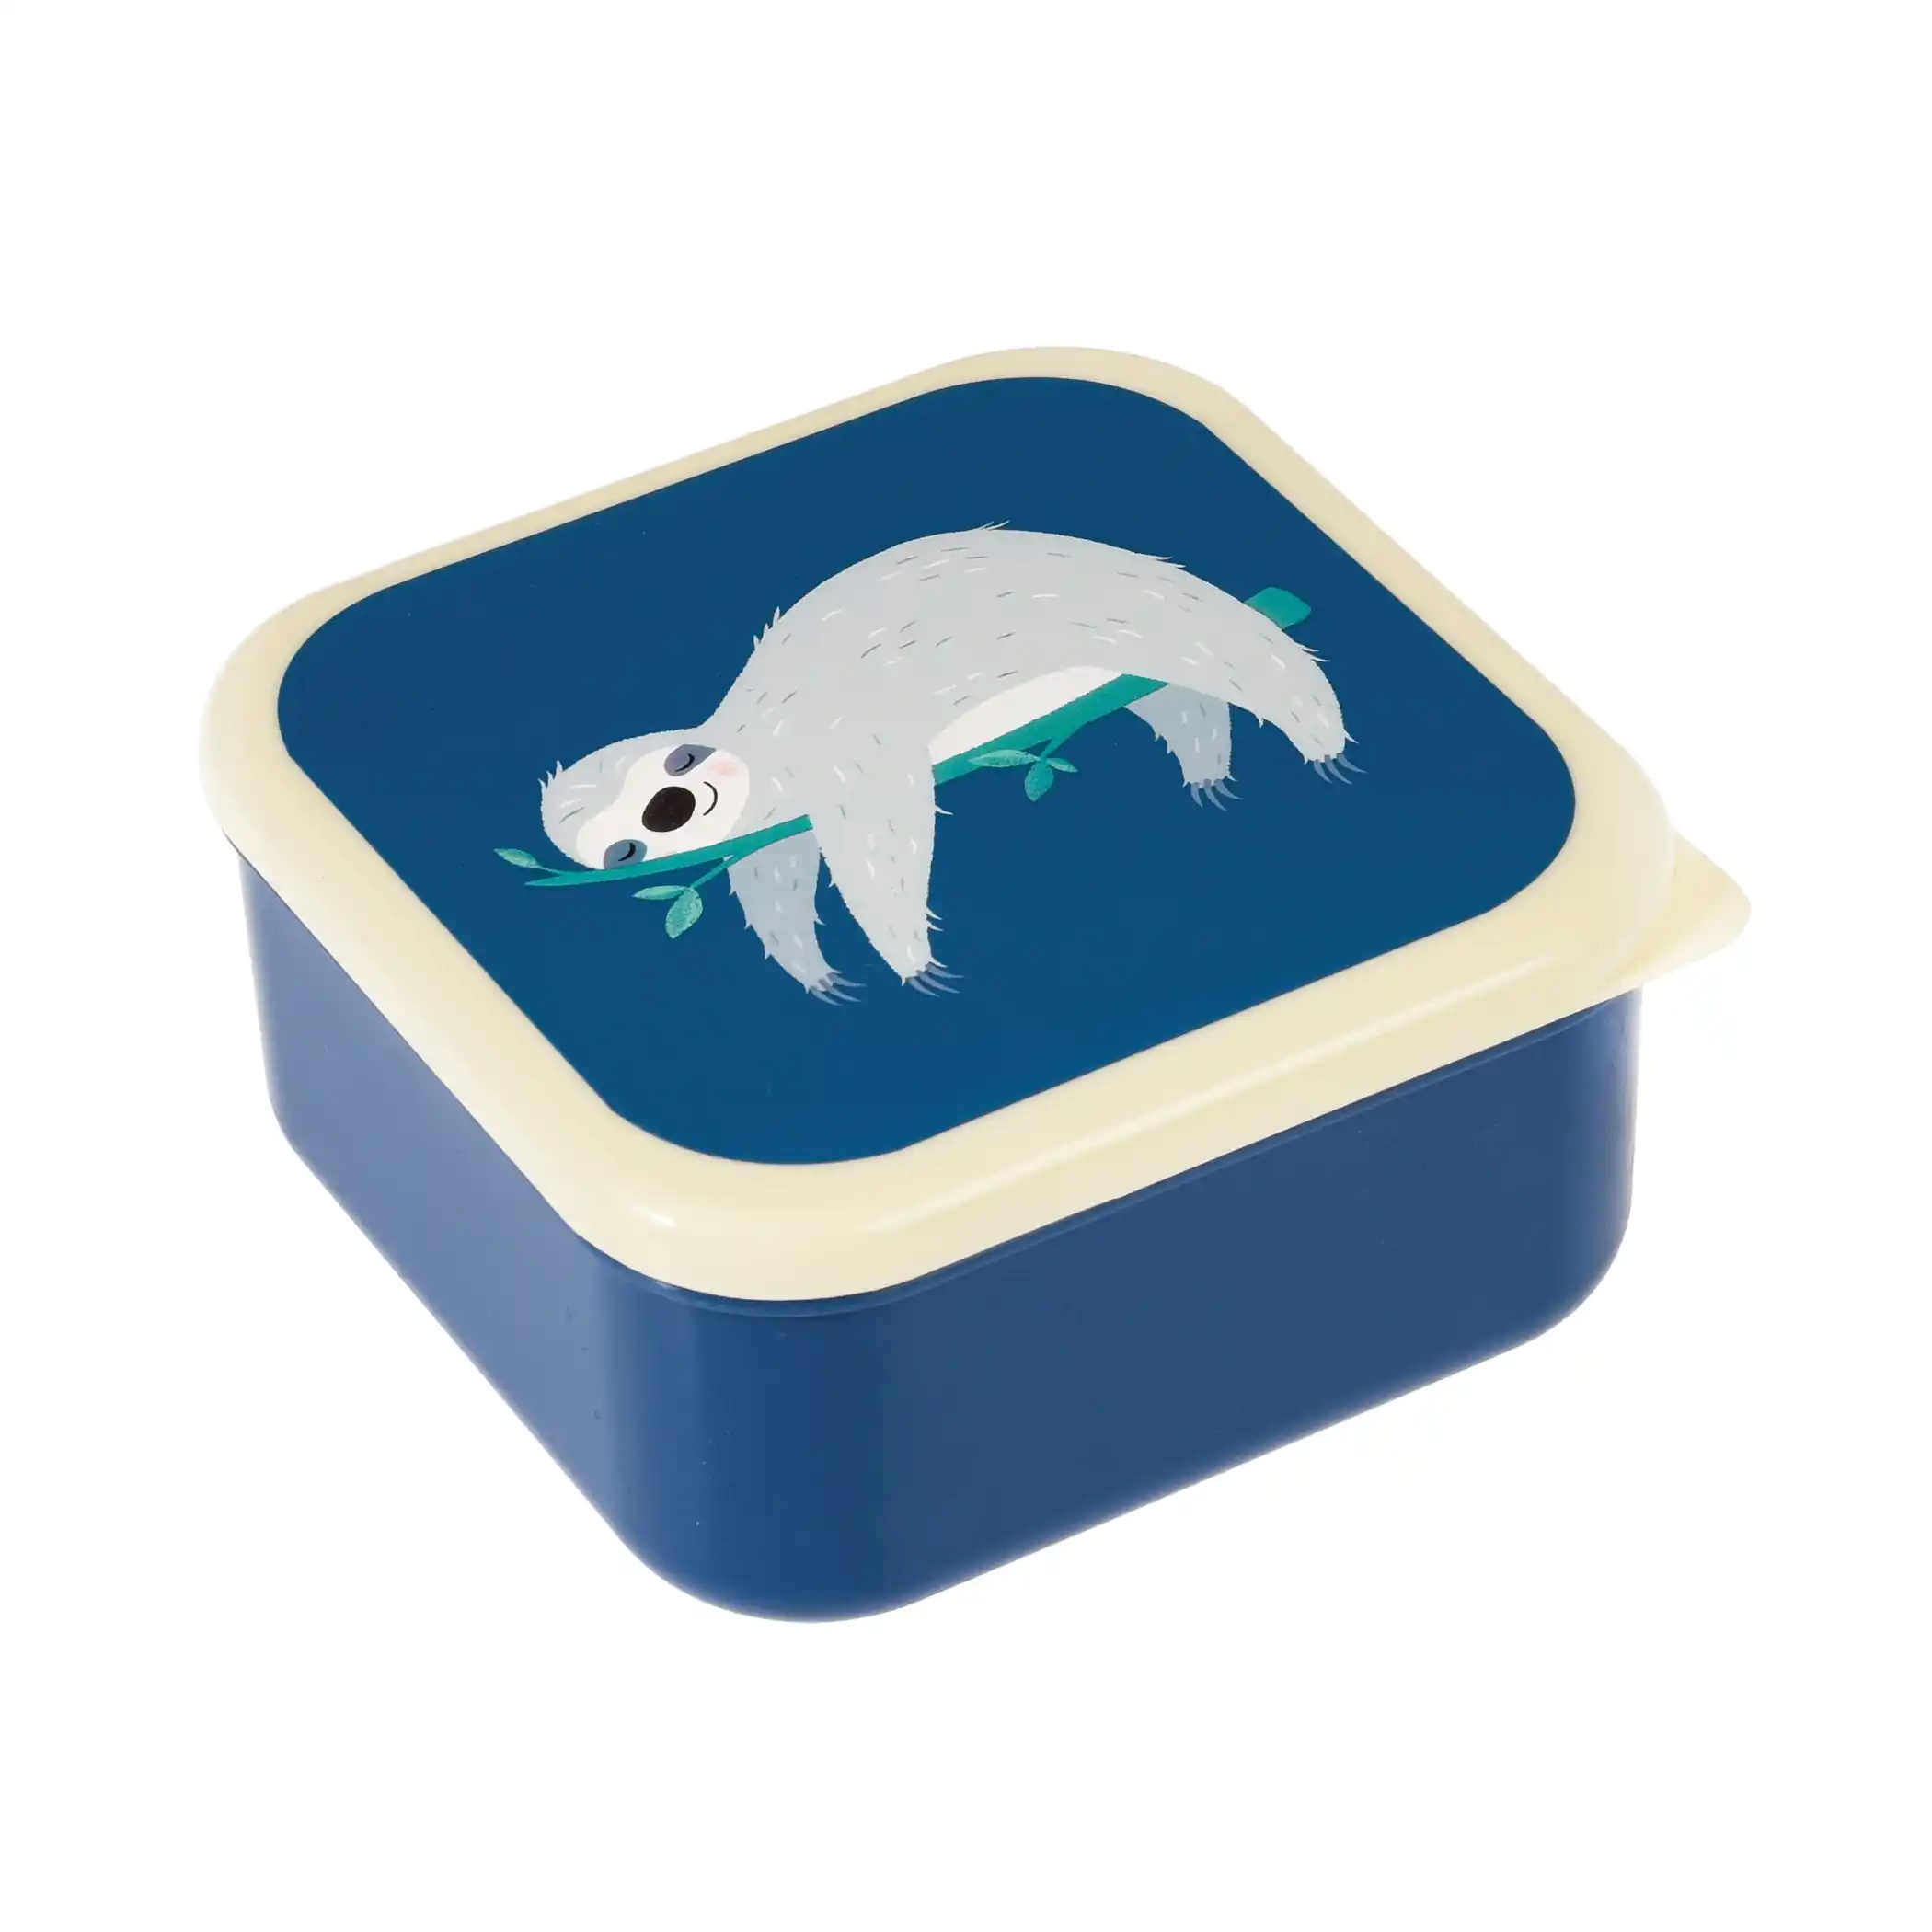 snack boxes (set of 3) - sydney the sloth